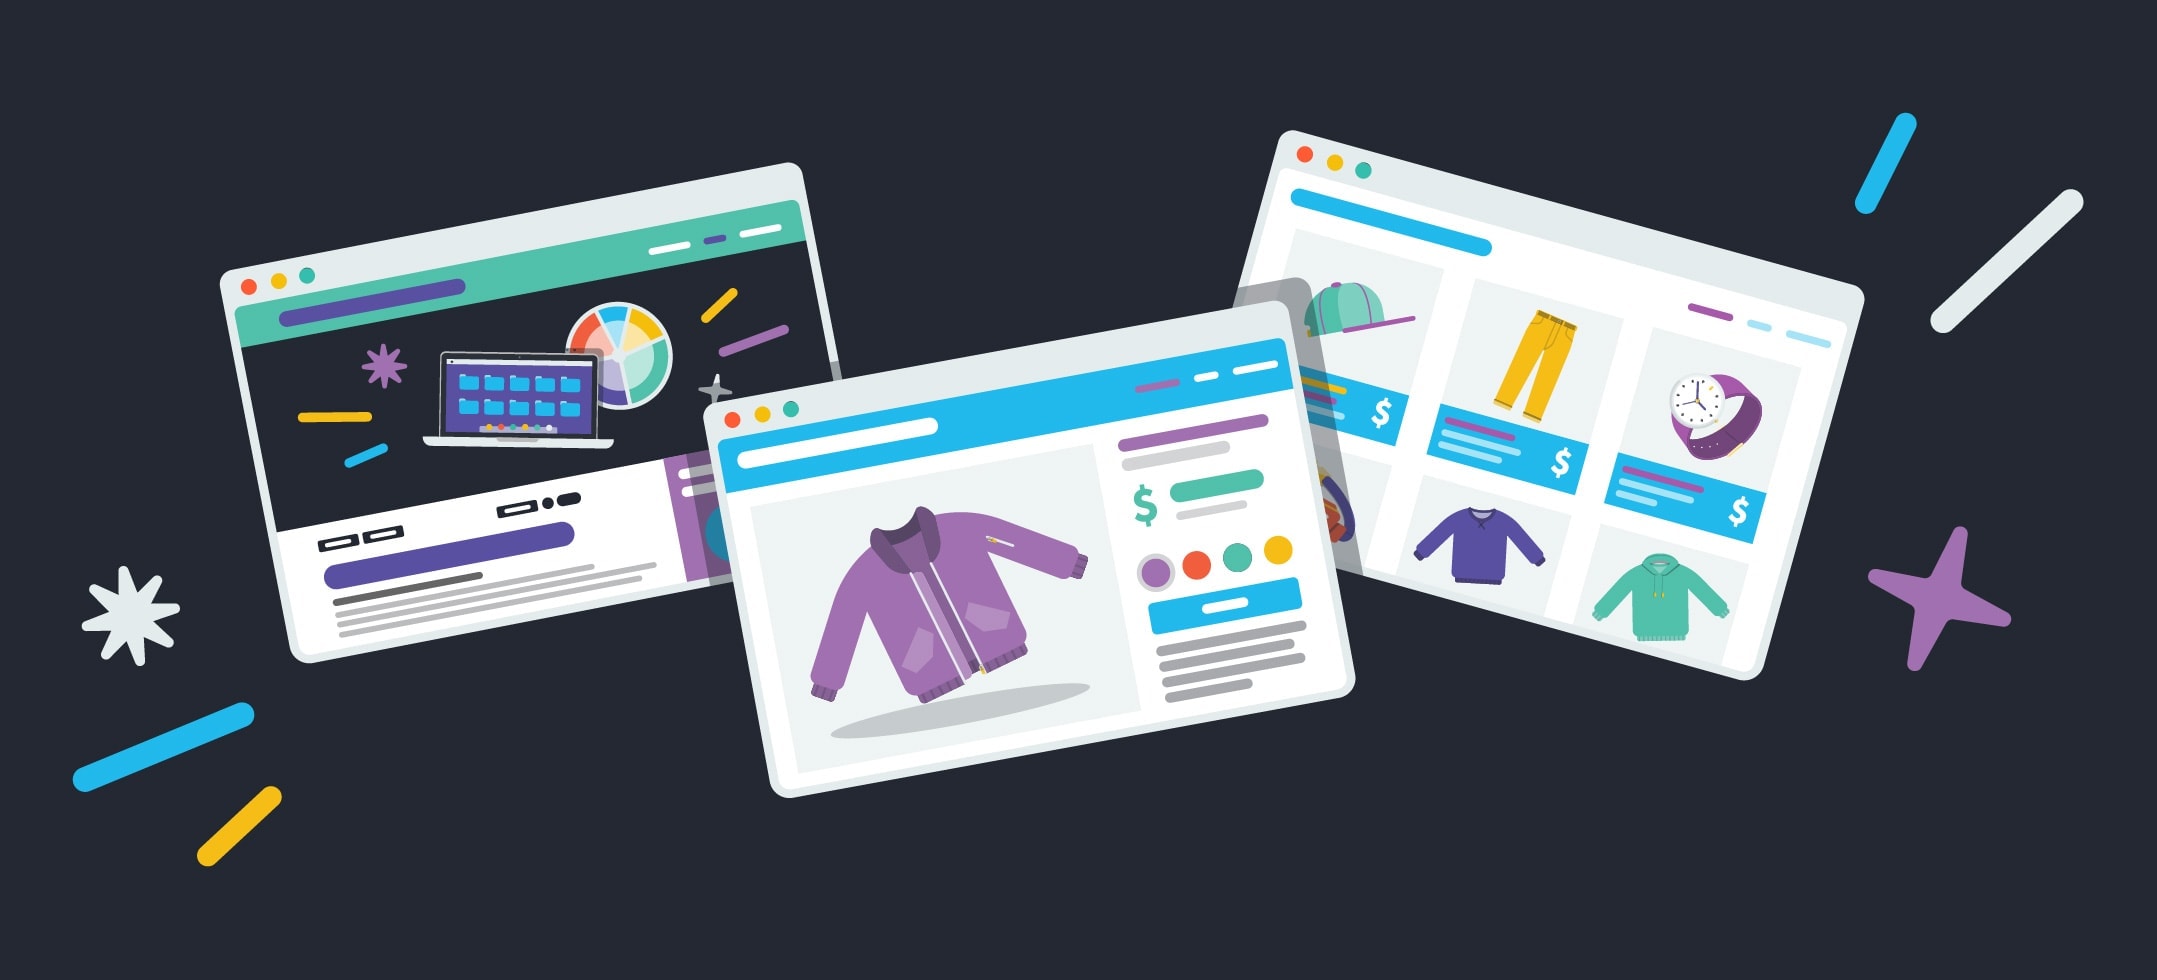 Open Source Ecommerce Platforms - Ecommerce Platforms You Should Consider for Your Online Store